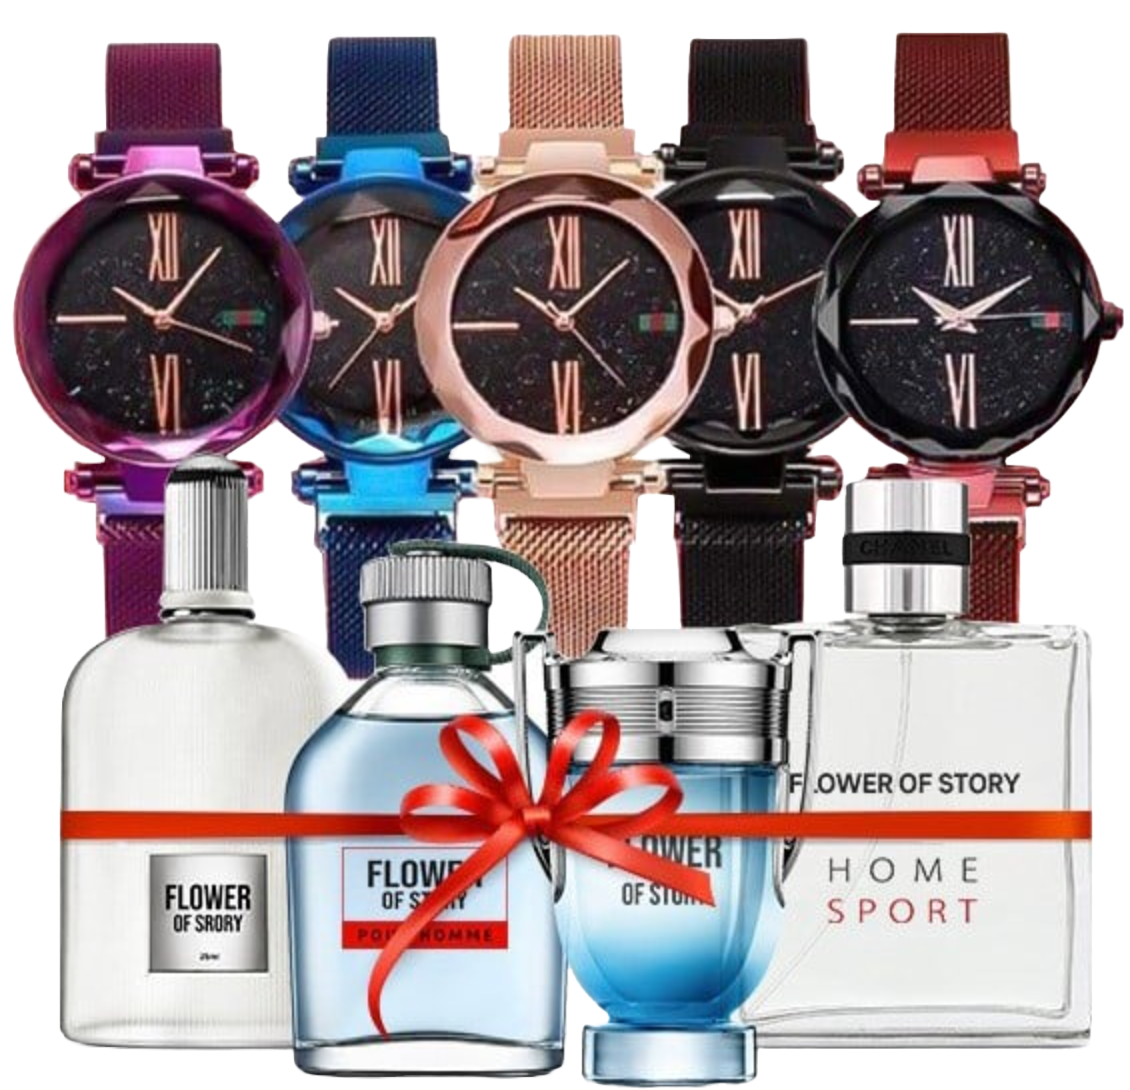 2 in 1 Bundle Pack 5 in 1 DVANS Stylish Watch For Women Assorted Colors With Flower of Story Perfume gift set, 25ml x 4 Piece, PCP01